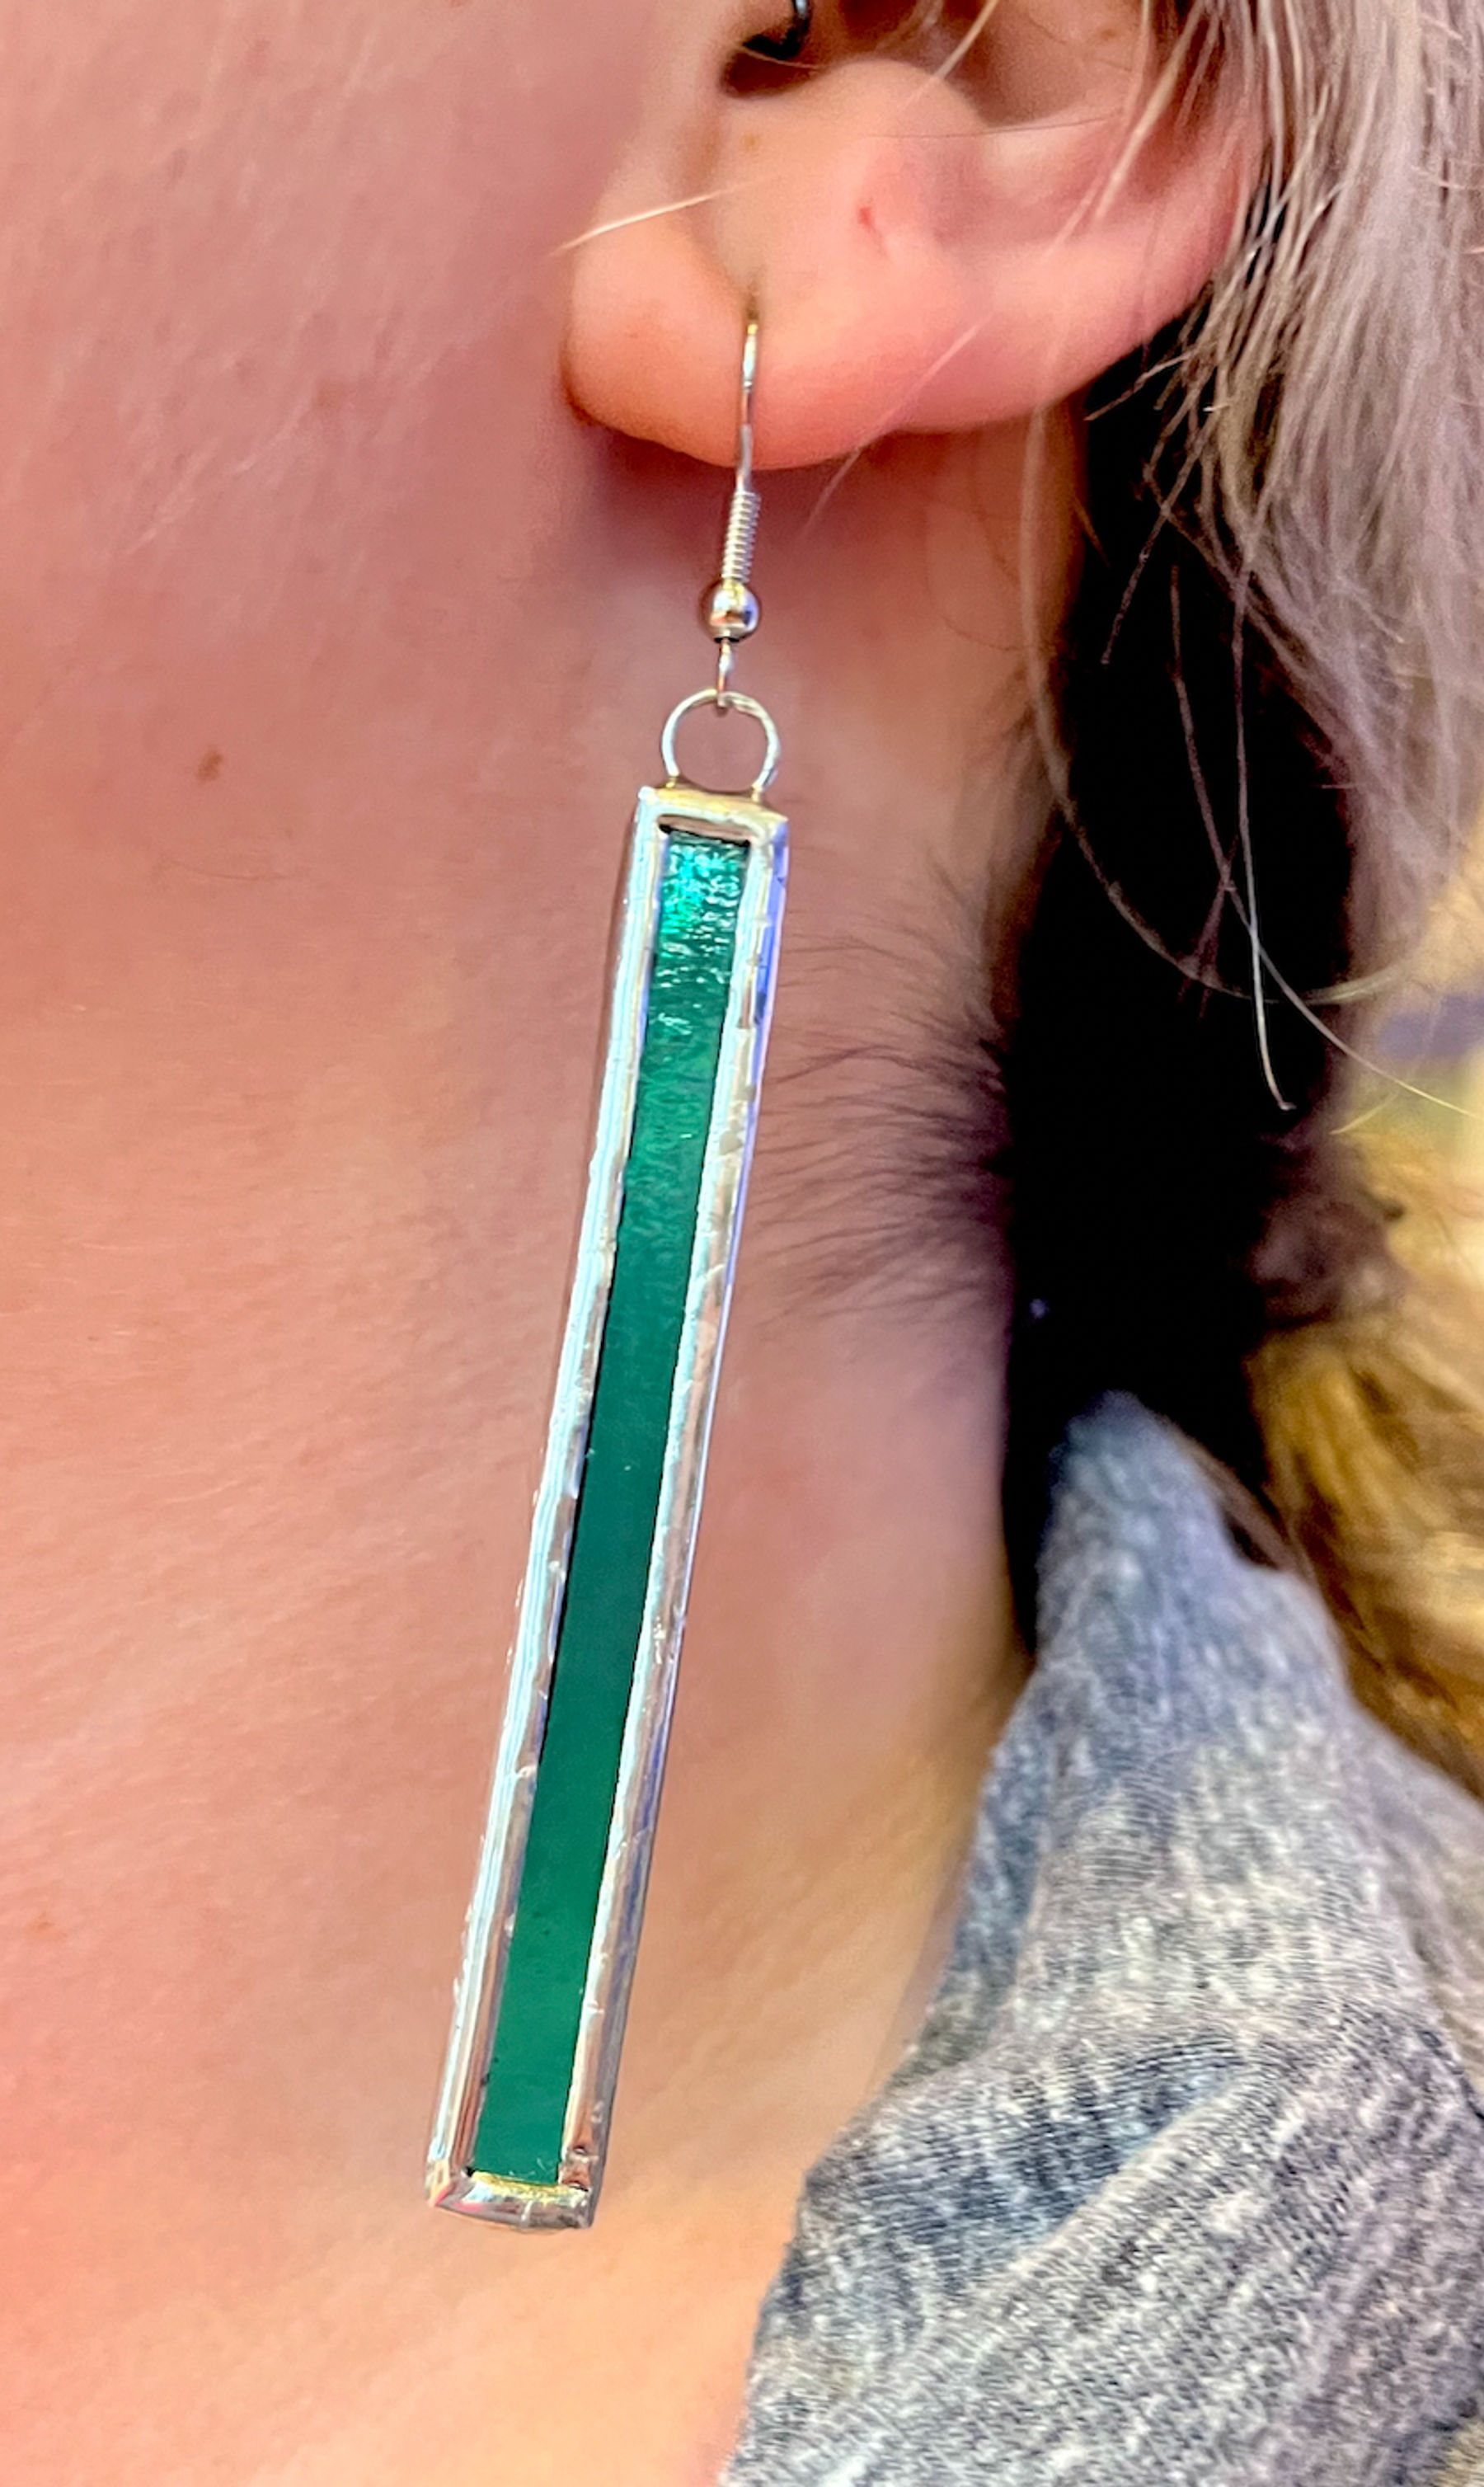 Make Your Own Earrings at Home